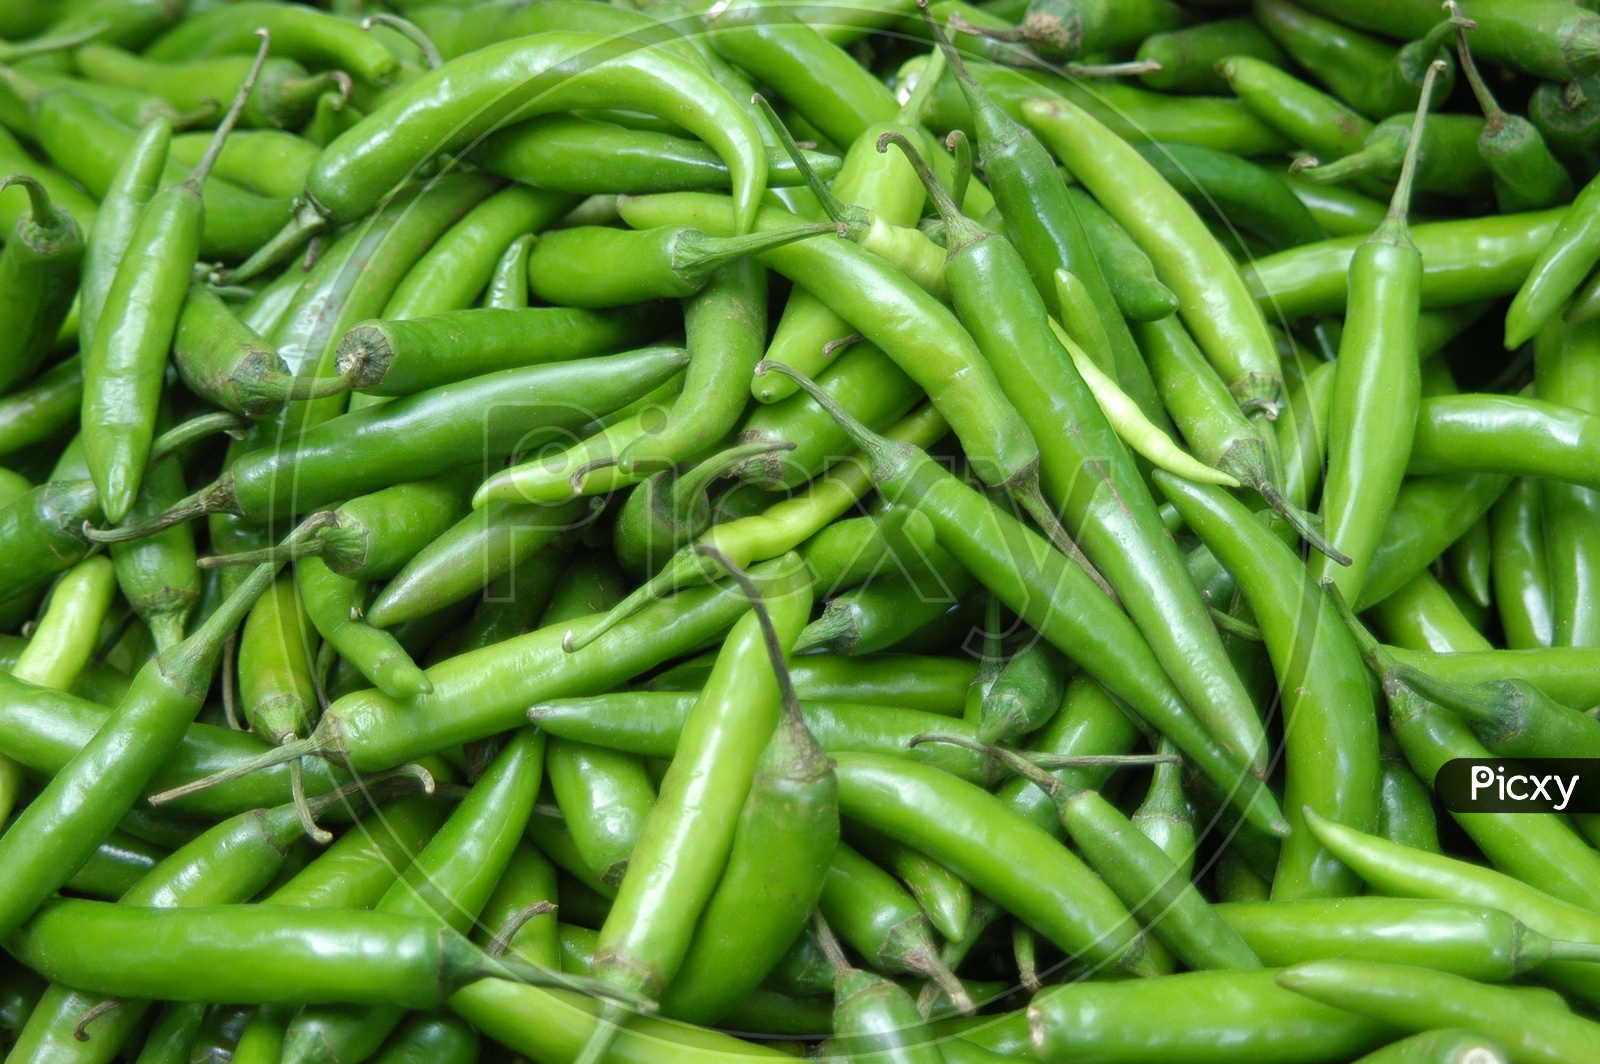 A bunch of green chillies